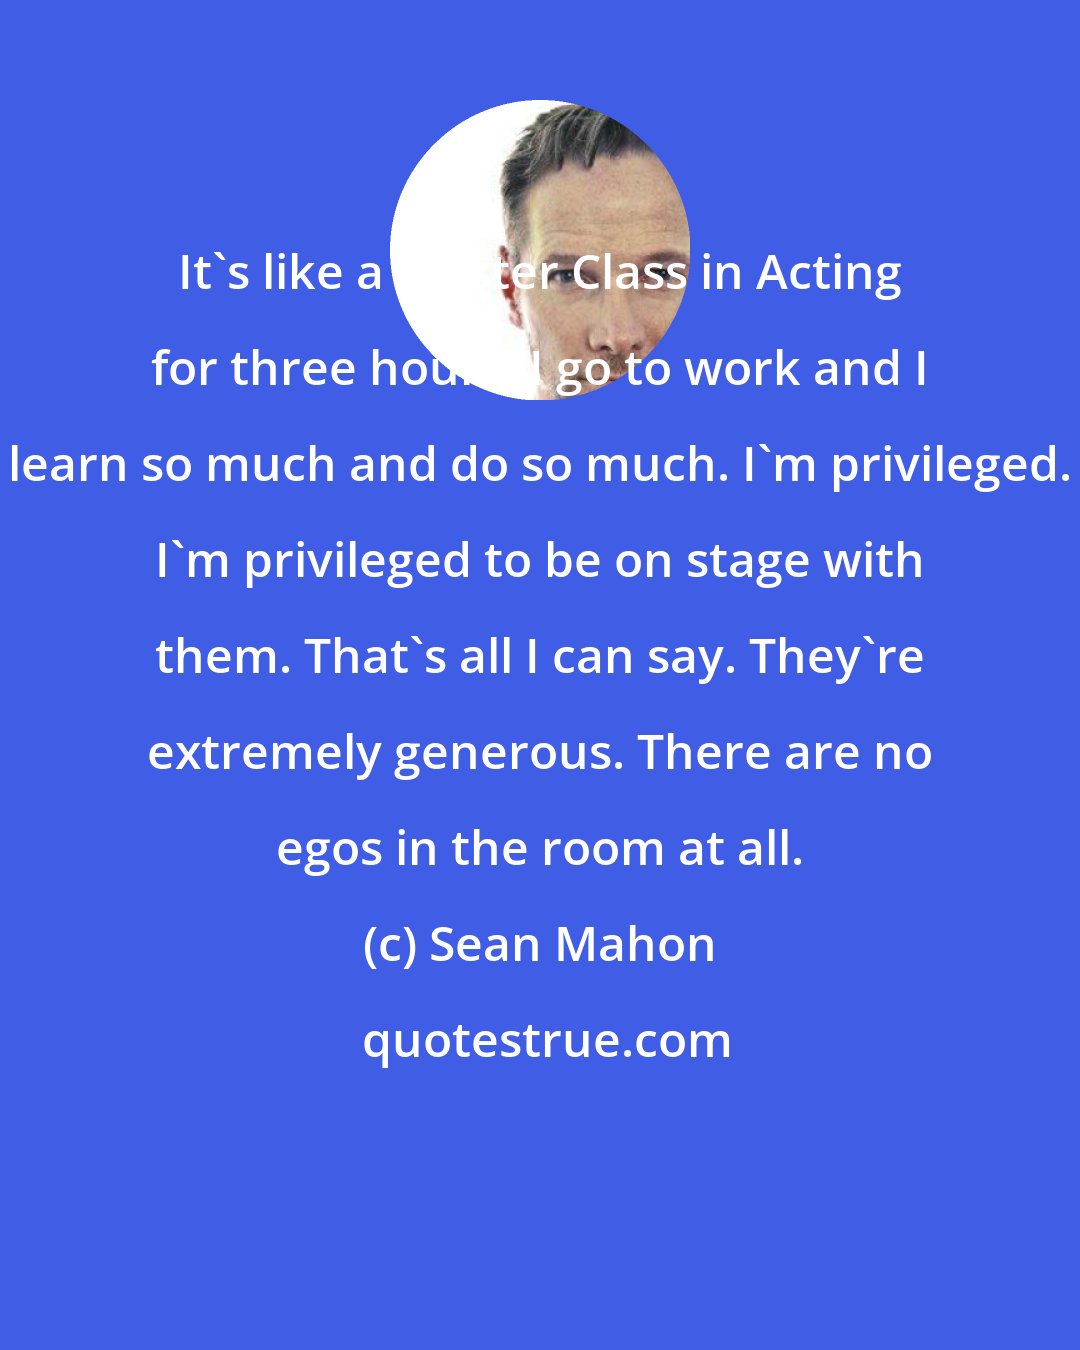 Sean Mahon: It's like a Master Class in Acting for three hours. I go to work and I learn so much and do so much. I'm privileged. I'm privileged to be on stage with them. That's all I can say. They're extremely generous. There are no egos in the room at all.